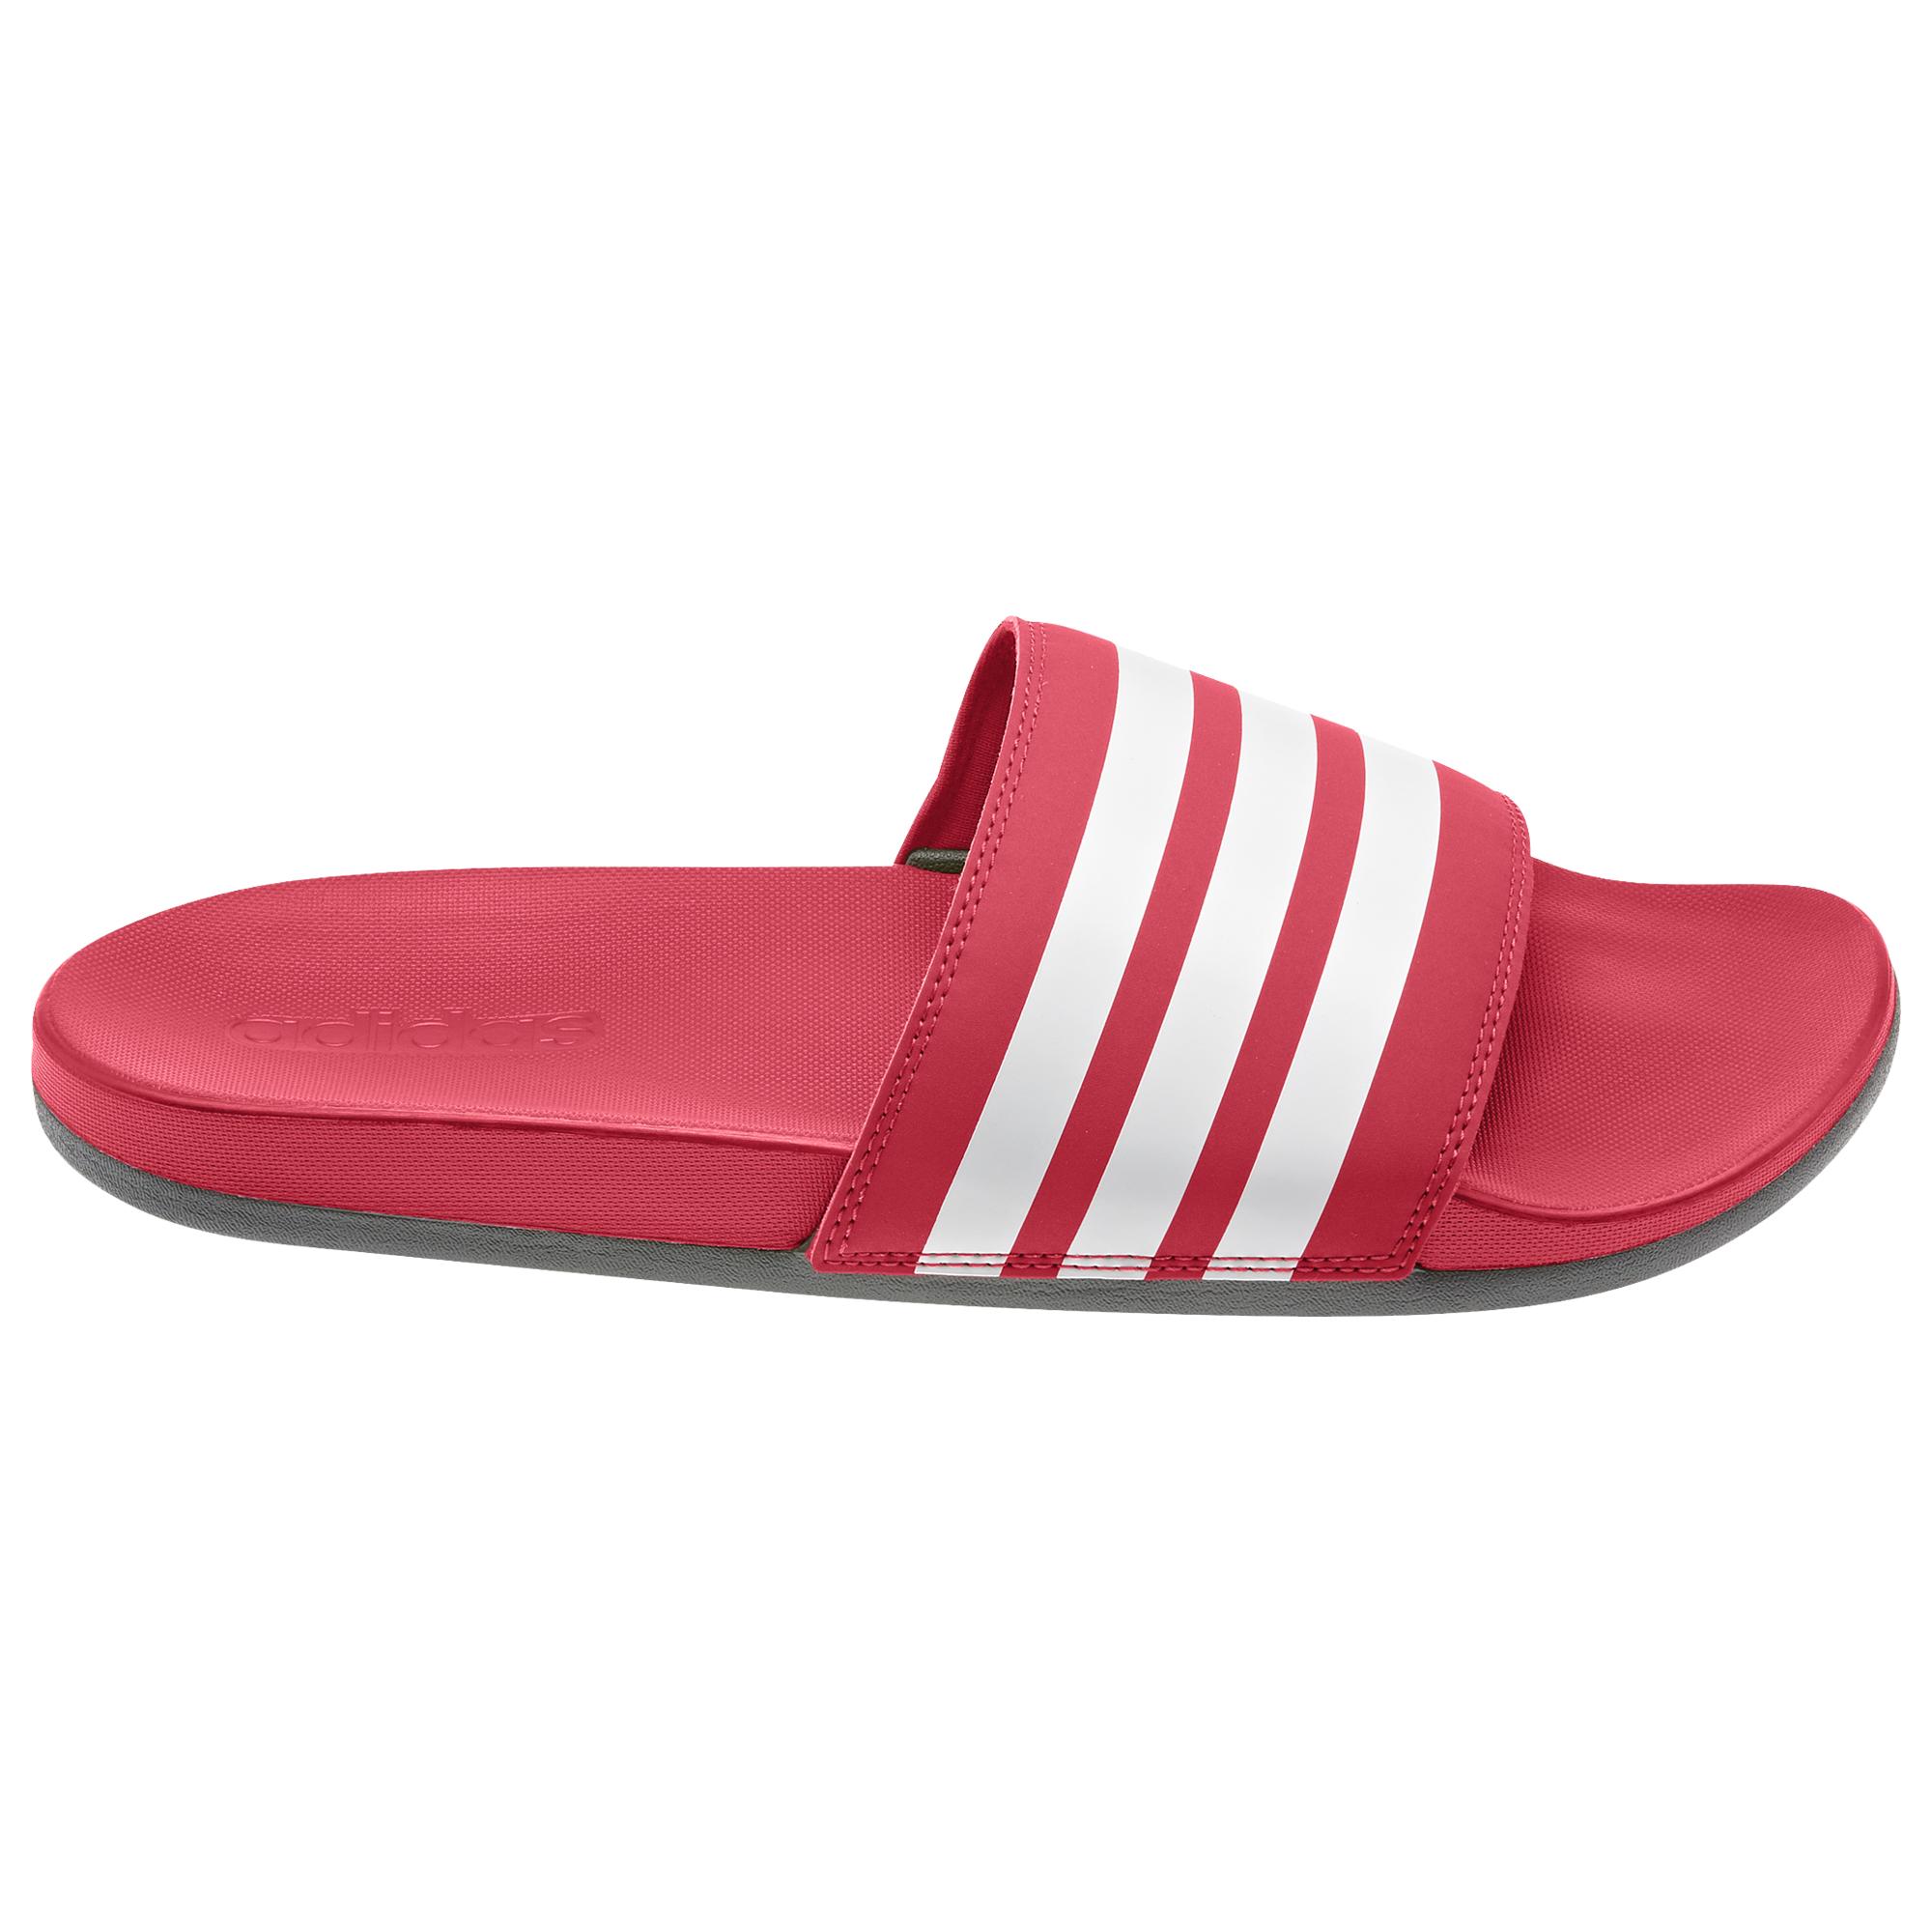 adidas Synthetic Adilette Comfort in Scarlet/White/Scarlet (Red) for Men -  Save 72% - Lyst